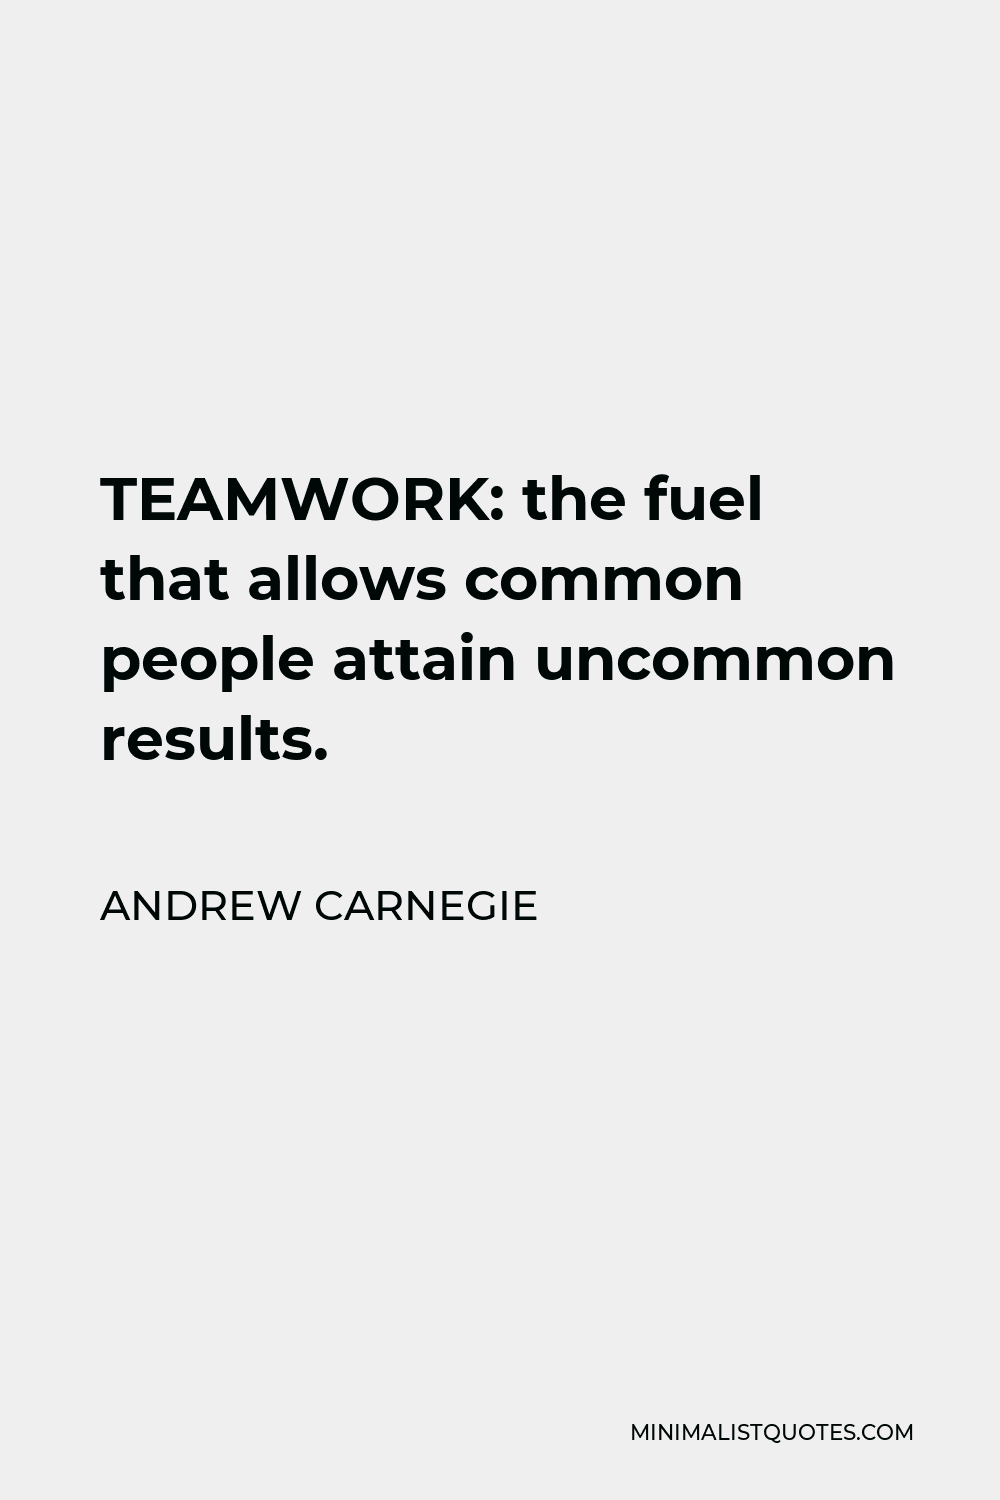 Andrew Carnegie Quote: TEAMWORK: the fuel that allows common people ...